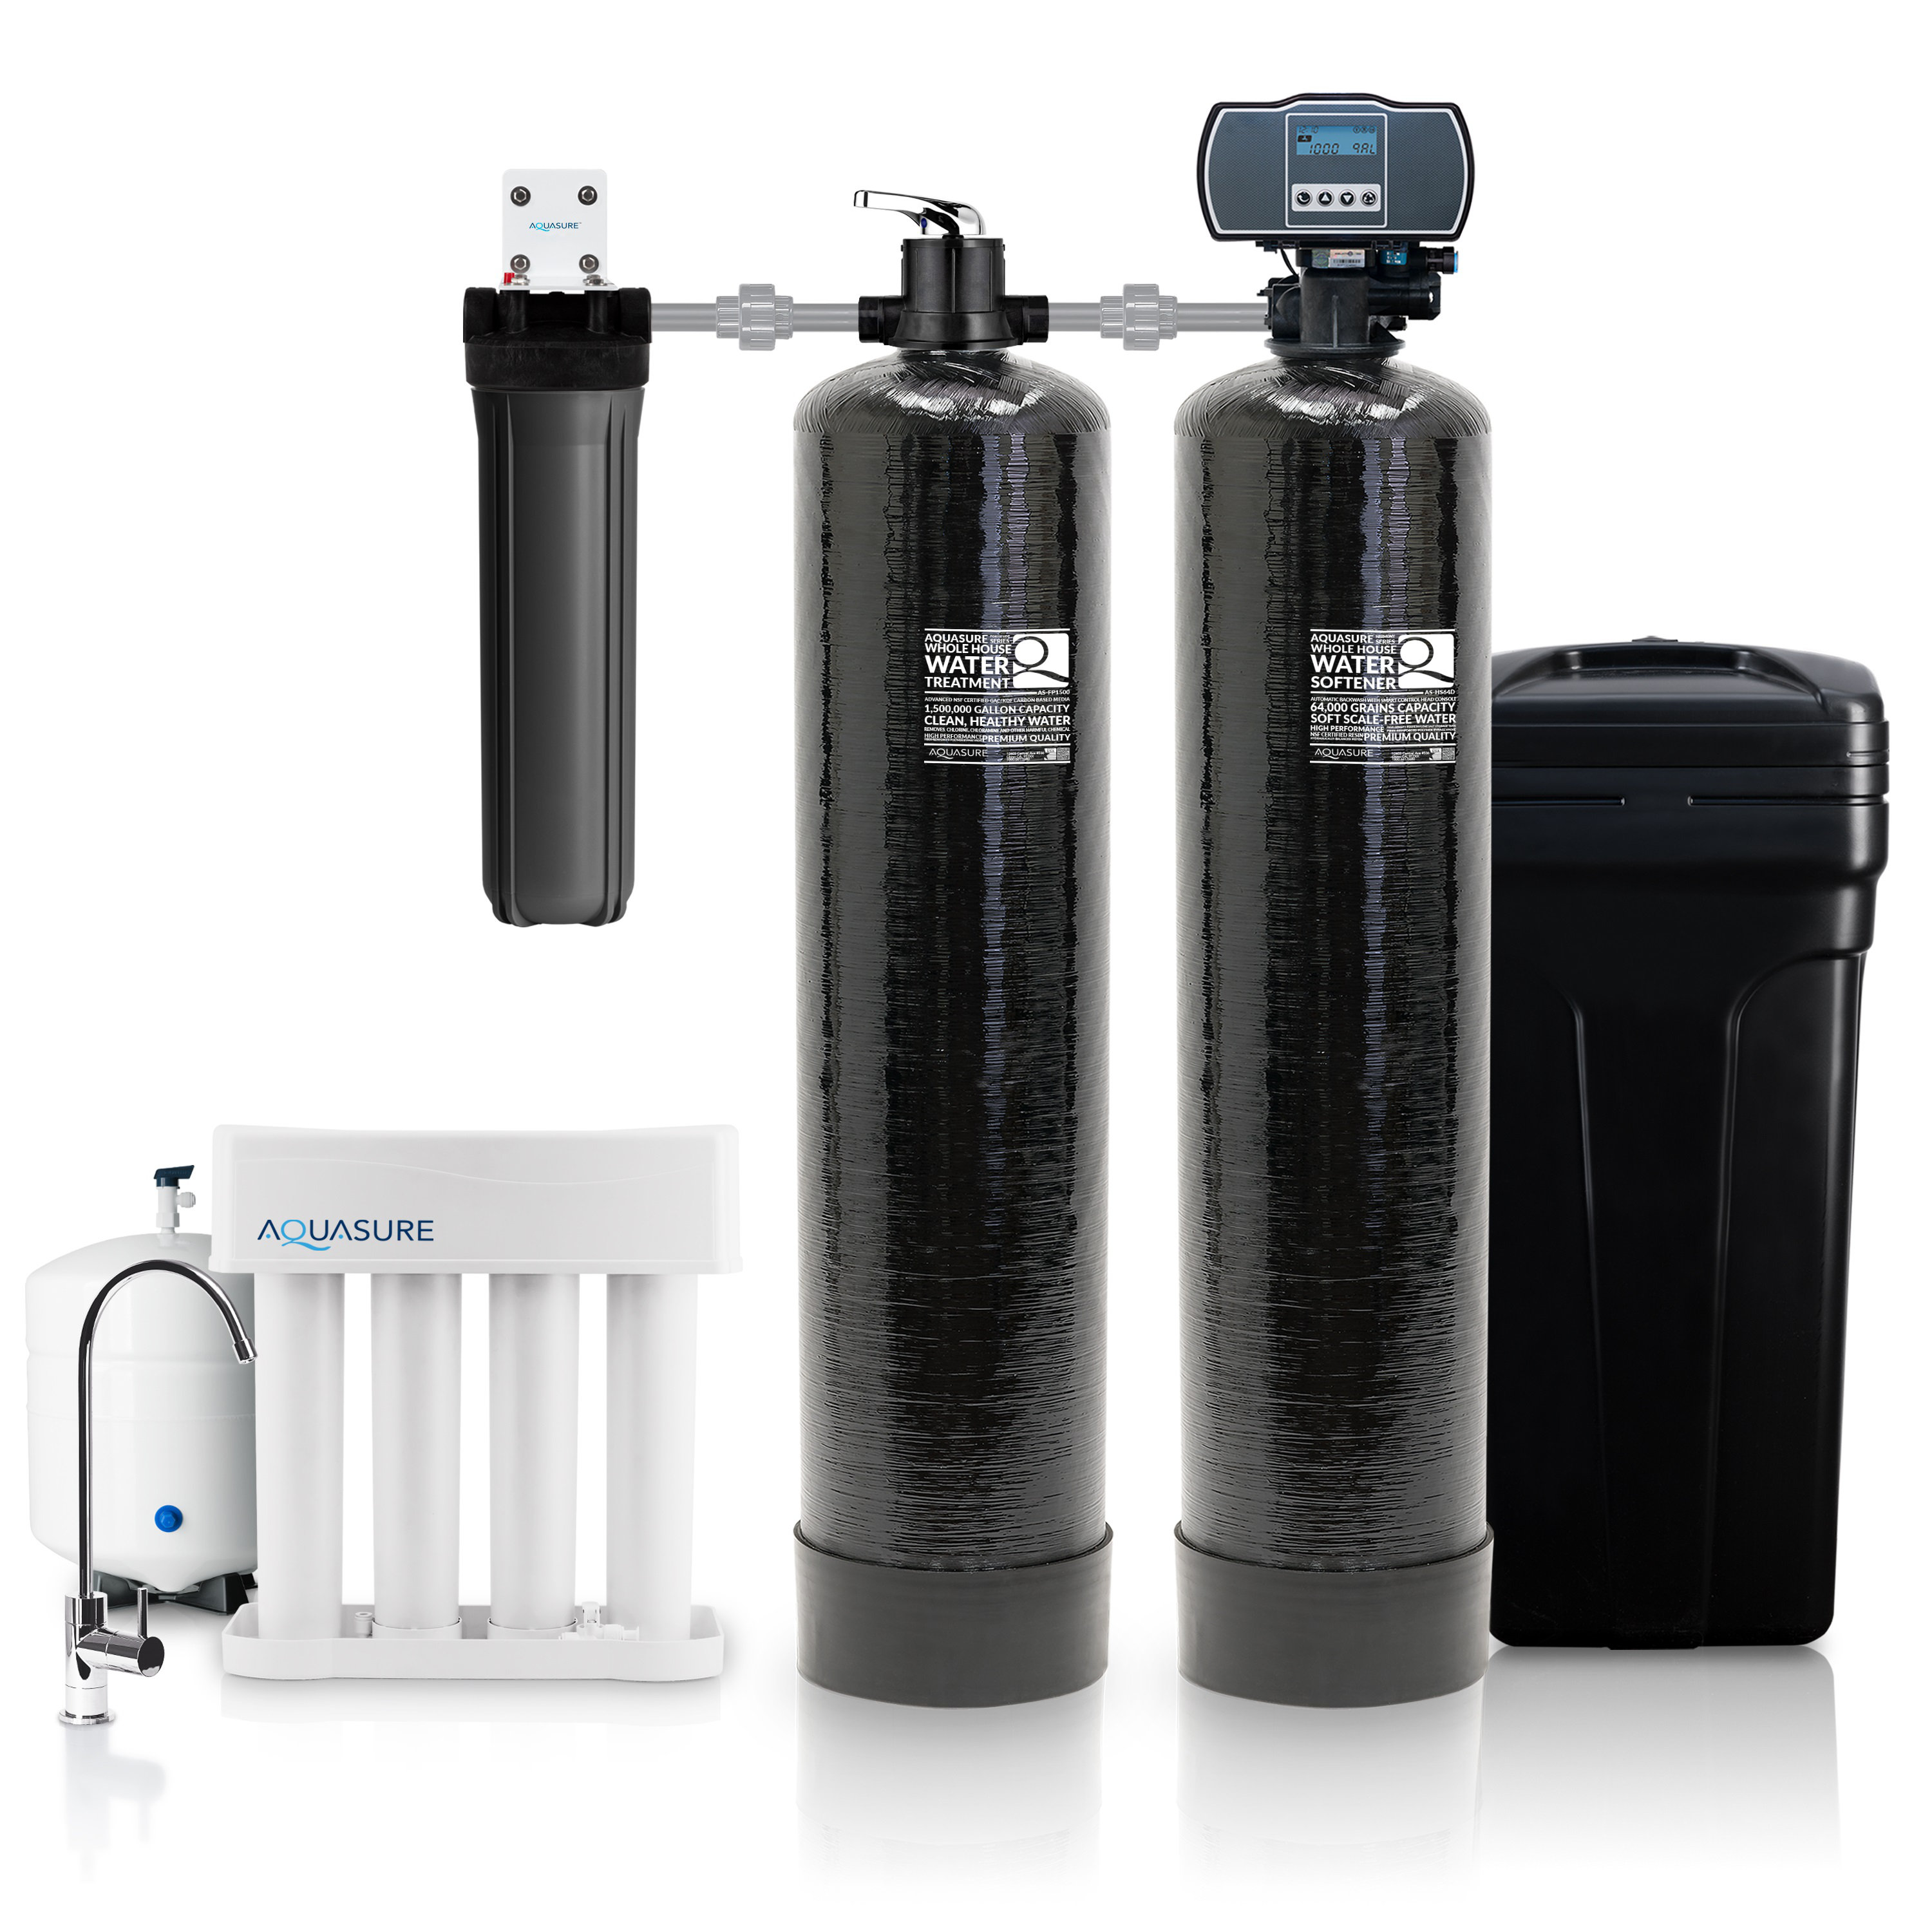 Water Filtration & Water Softeners